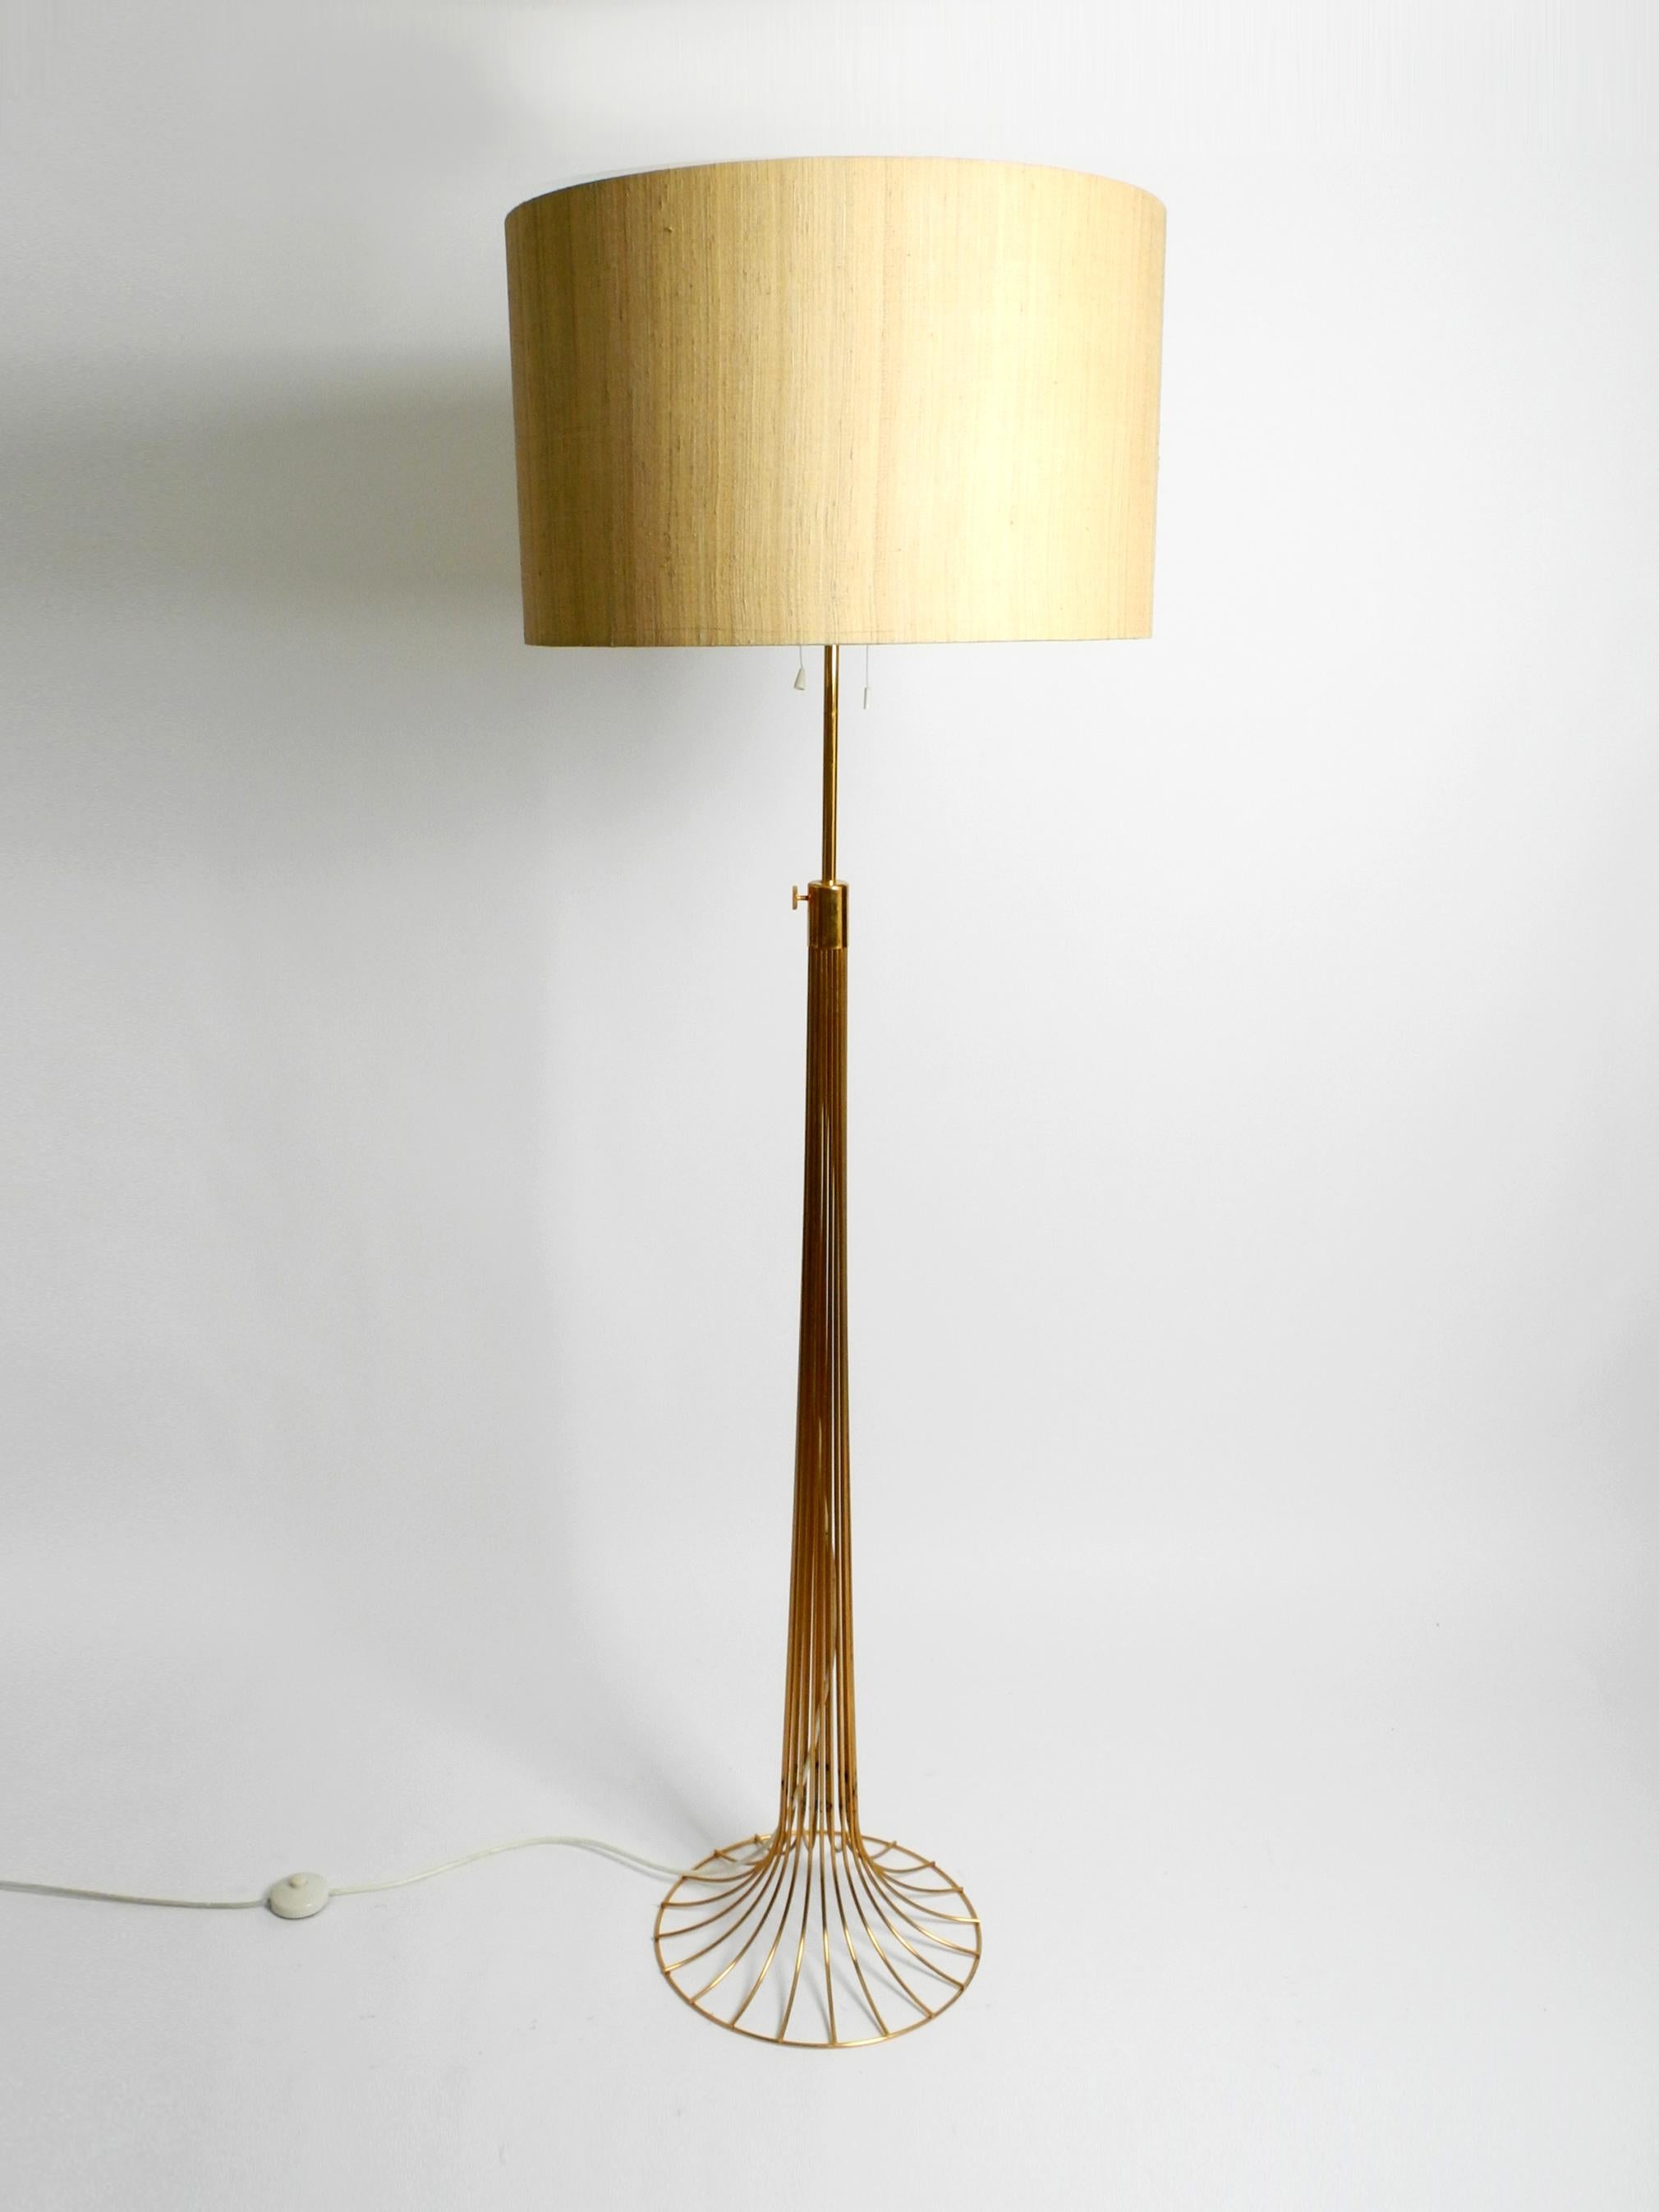 Very rare beautiful original 1960s large metal wire floor lamp.
Great very elegant Space Age design. Made in Germany.
The frame is anodized in gold color and steplessly height-adjustable.
The screw for fixing is just below the bulbs. See photo